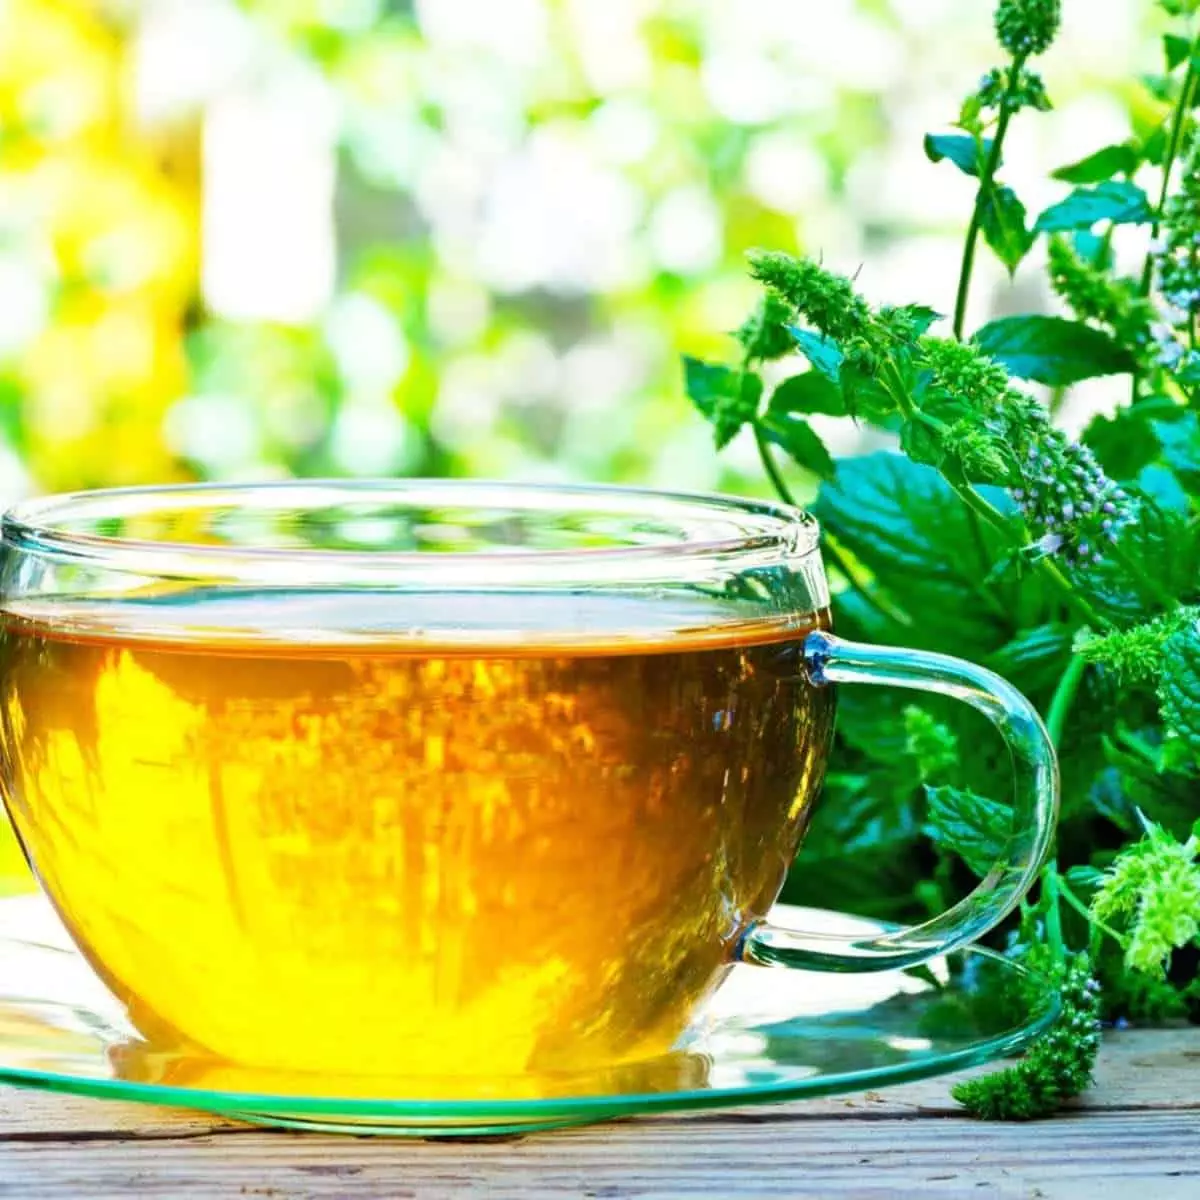 Tea to support your immune system